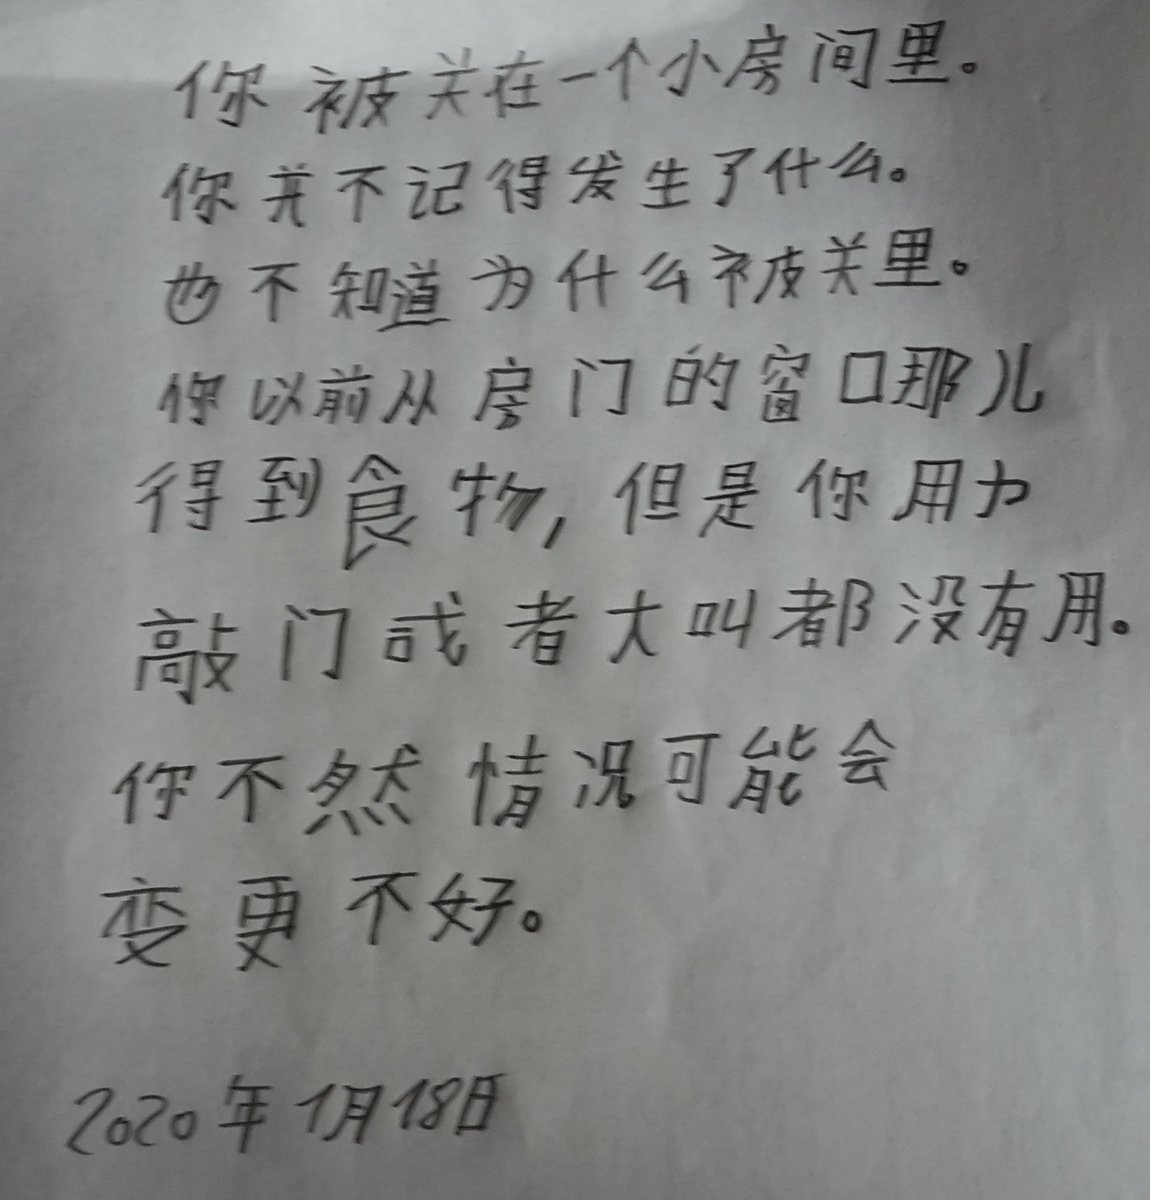 Chinese handwriting after two years of self-study.